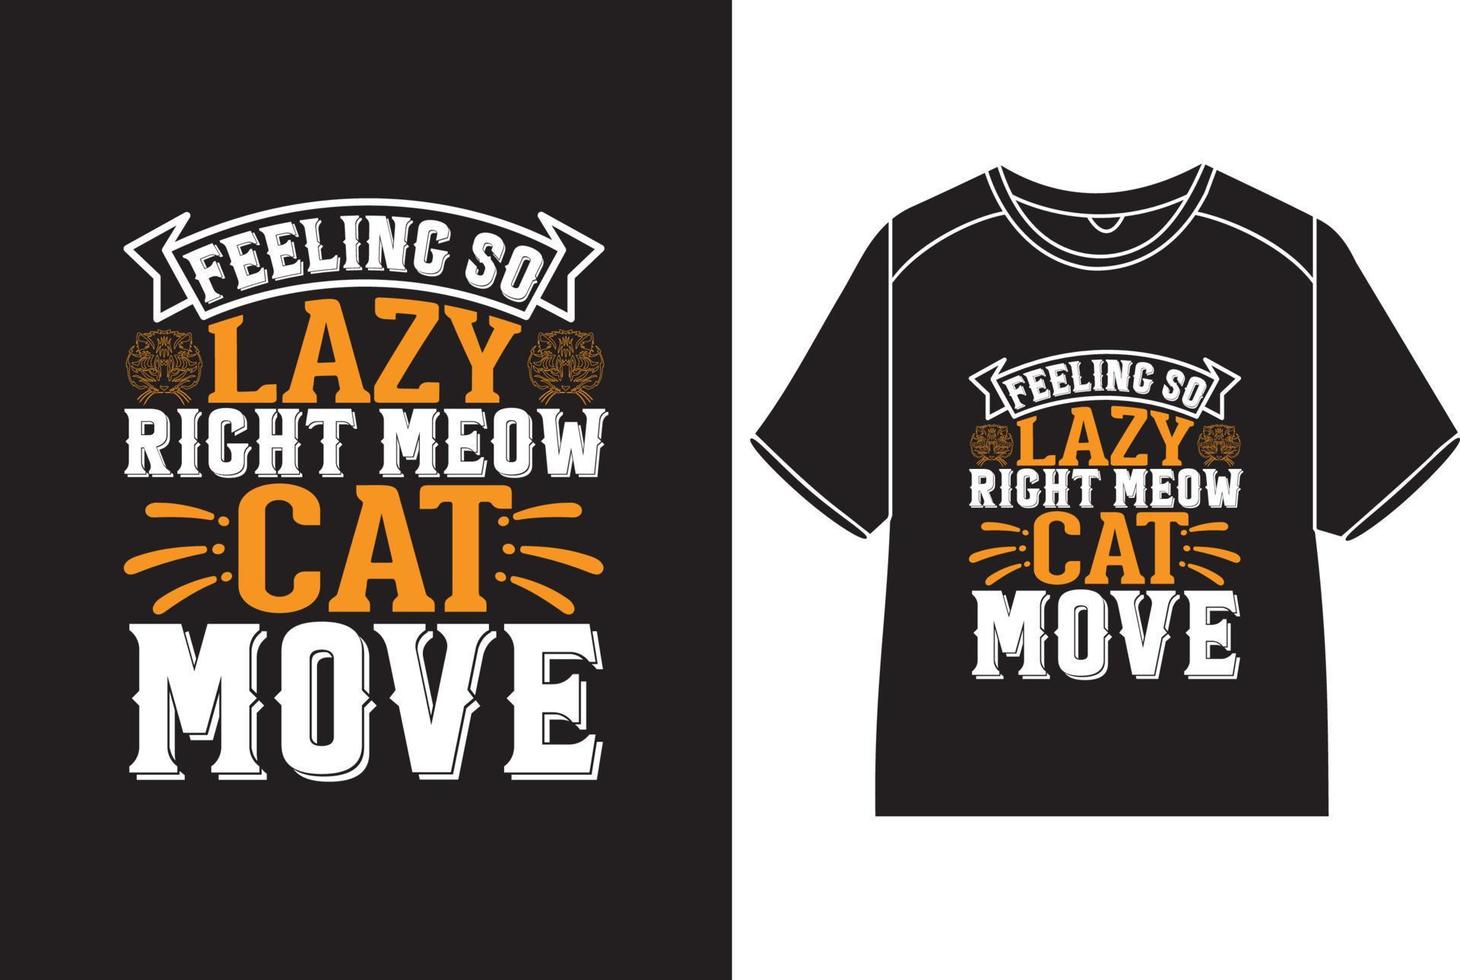 Feeling so lazy right meow cat move T-Shirt Design vector